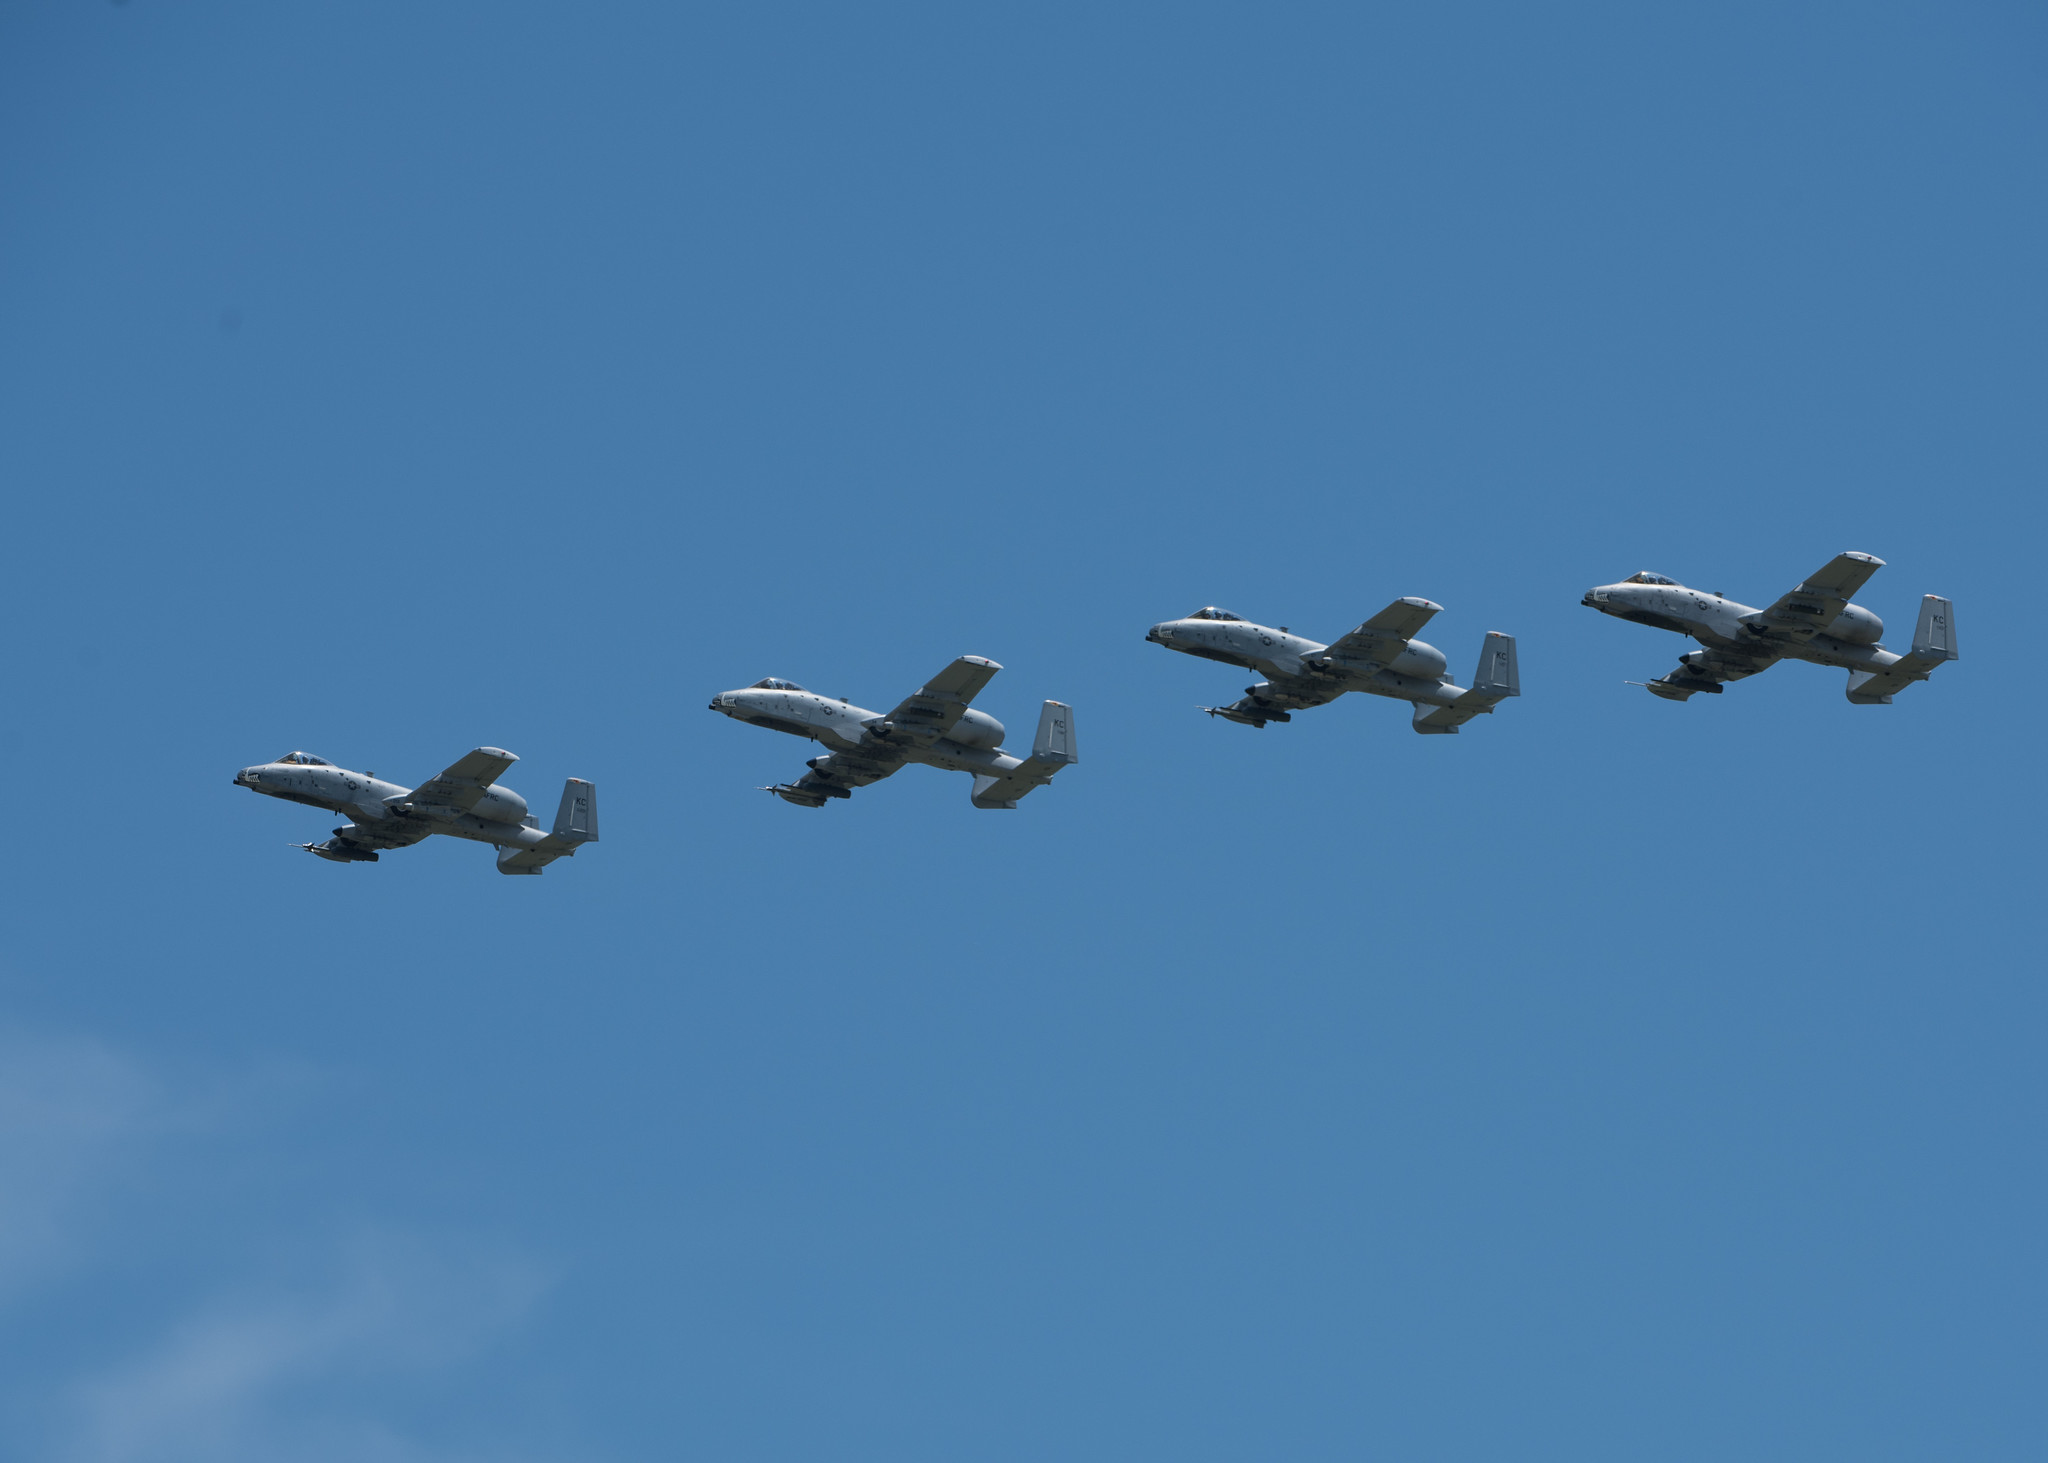 Four A-10 Thunderbolt IIs with the 442nd Fighter Wing fly in formation during the Wings Over Whiteman airshow on June 15, 2019, at Whiteman Air Force Base, Missouri.  (U.S. Air Force/ Airman 1st Class Parker J. McCauley)